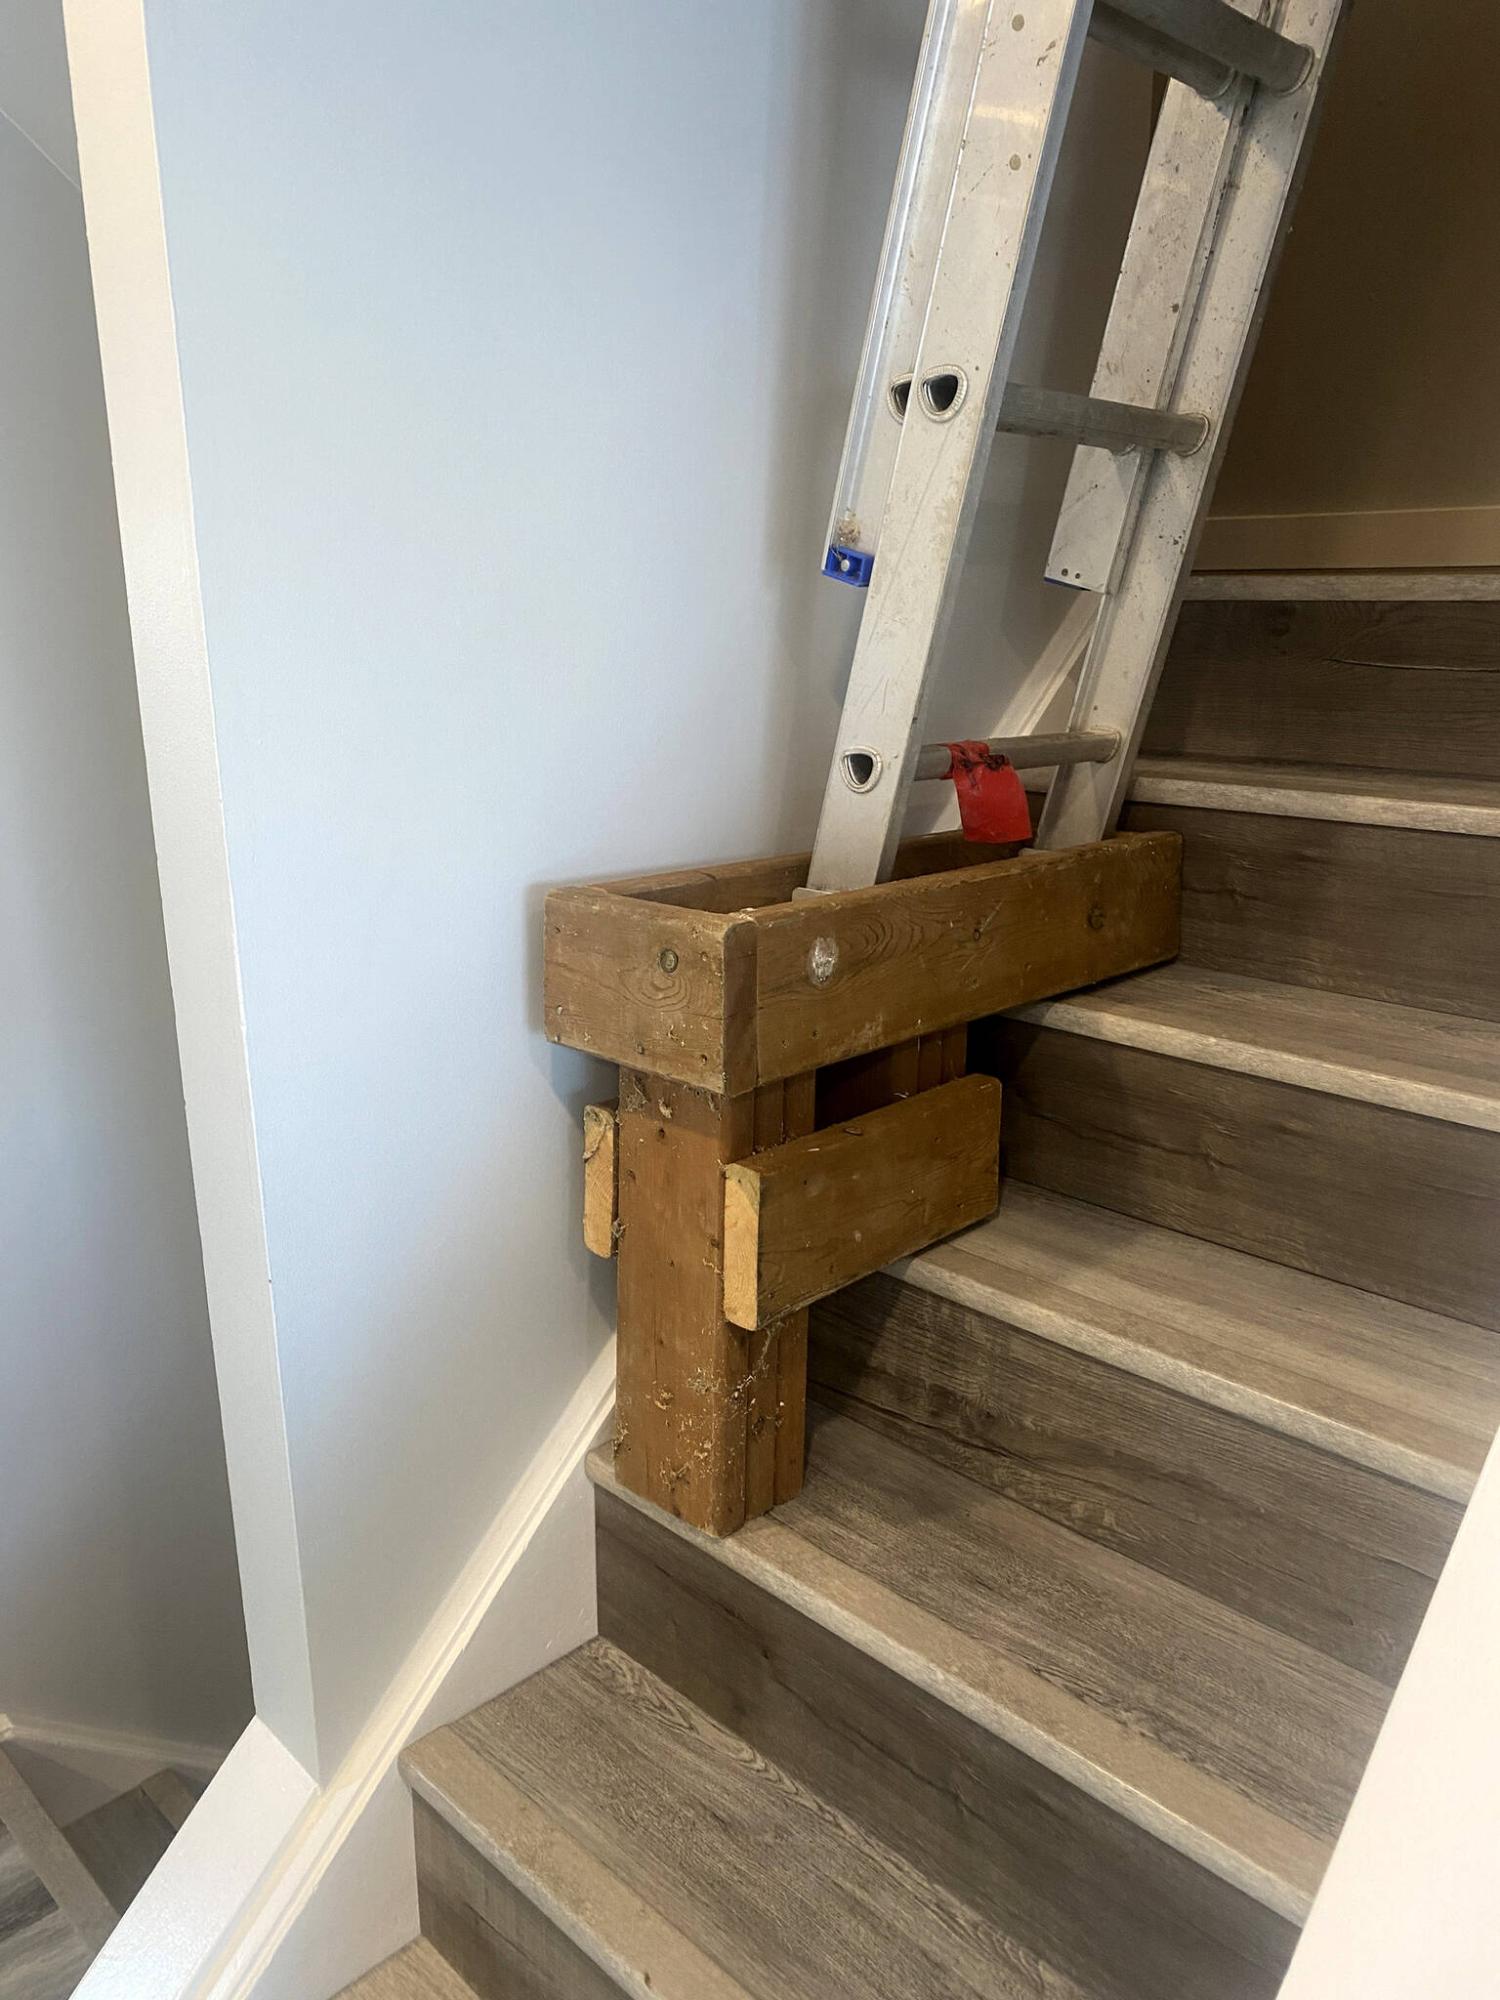  <p>Photos by Marc LaBossiere / Winnipeg Free Press</p>
                                <p>Fashioned from remnant treated lumber nearly a decade ago, Marc&rsquo;s little stair helper continues to serve by providing a level and rigid support for his ladder.</p> 